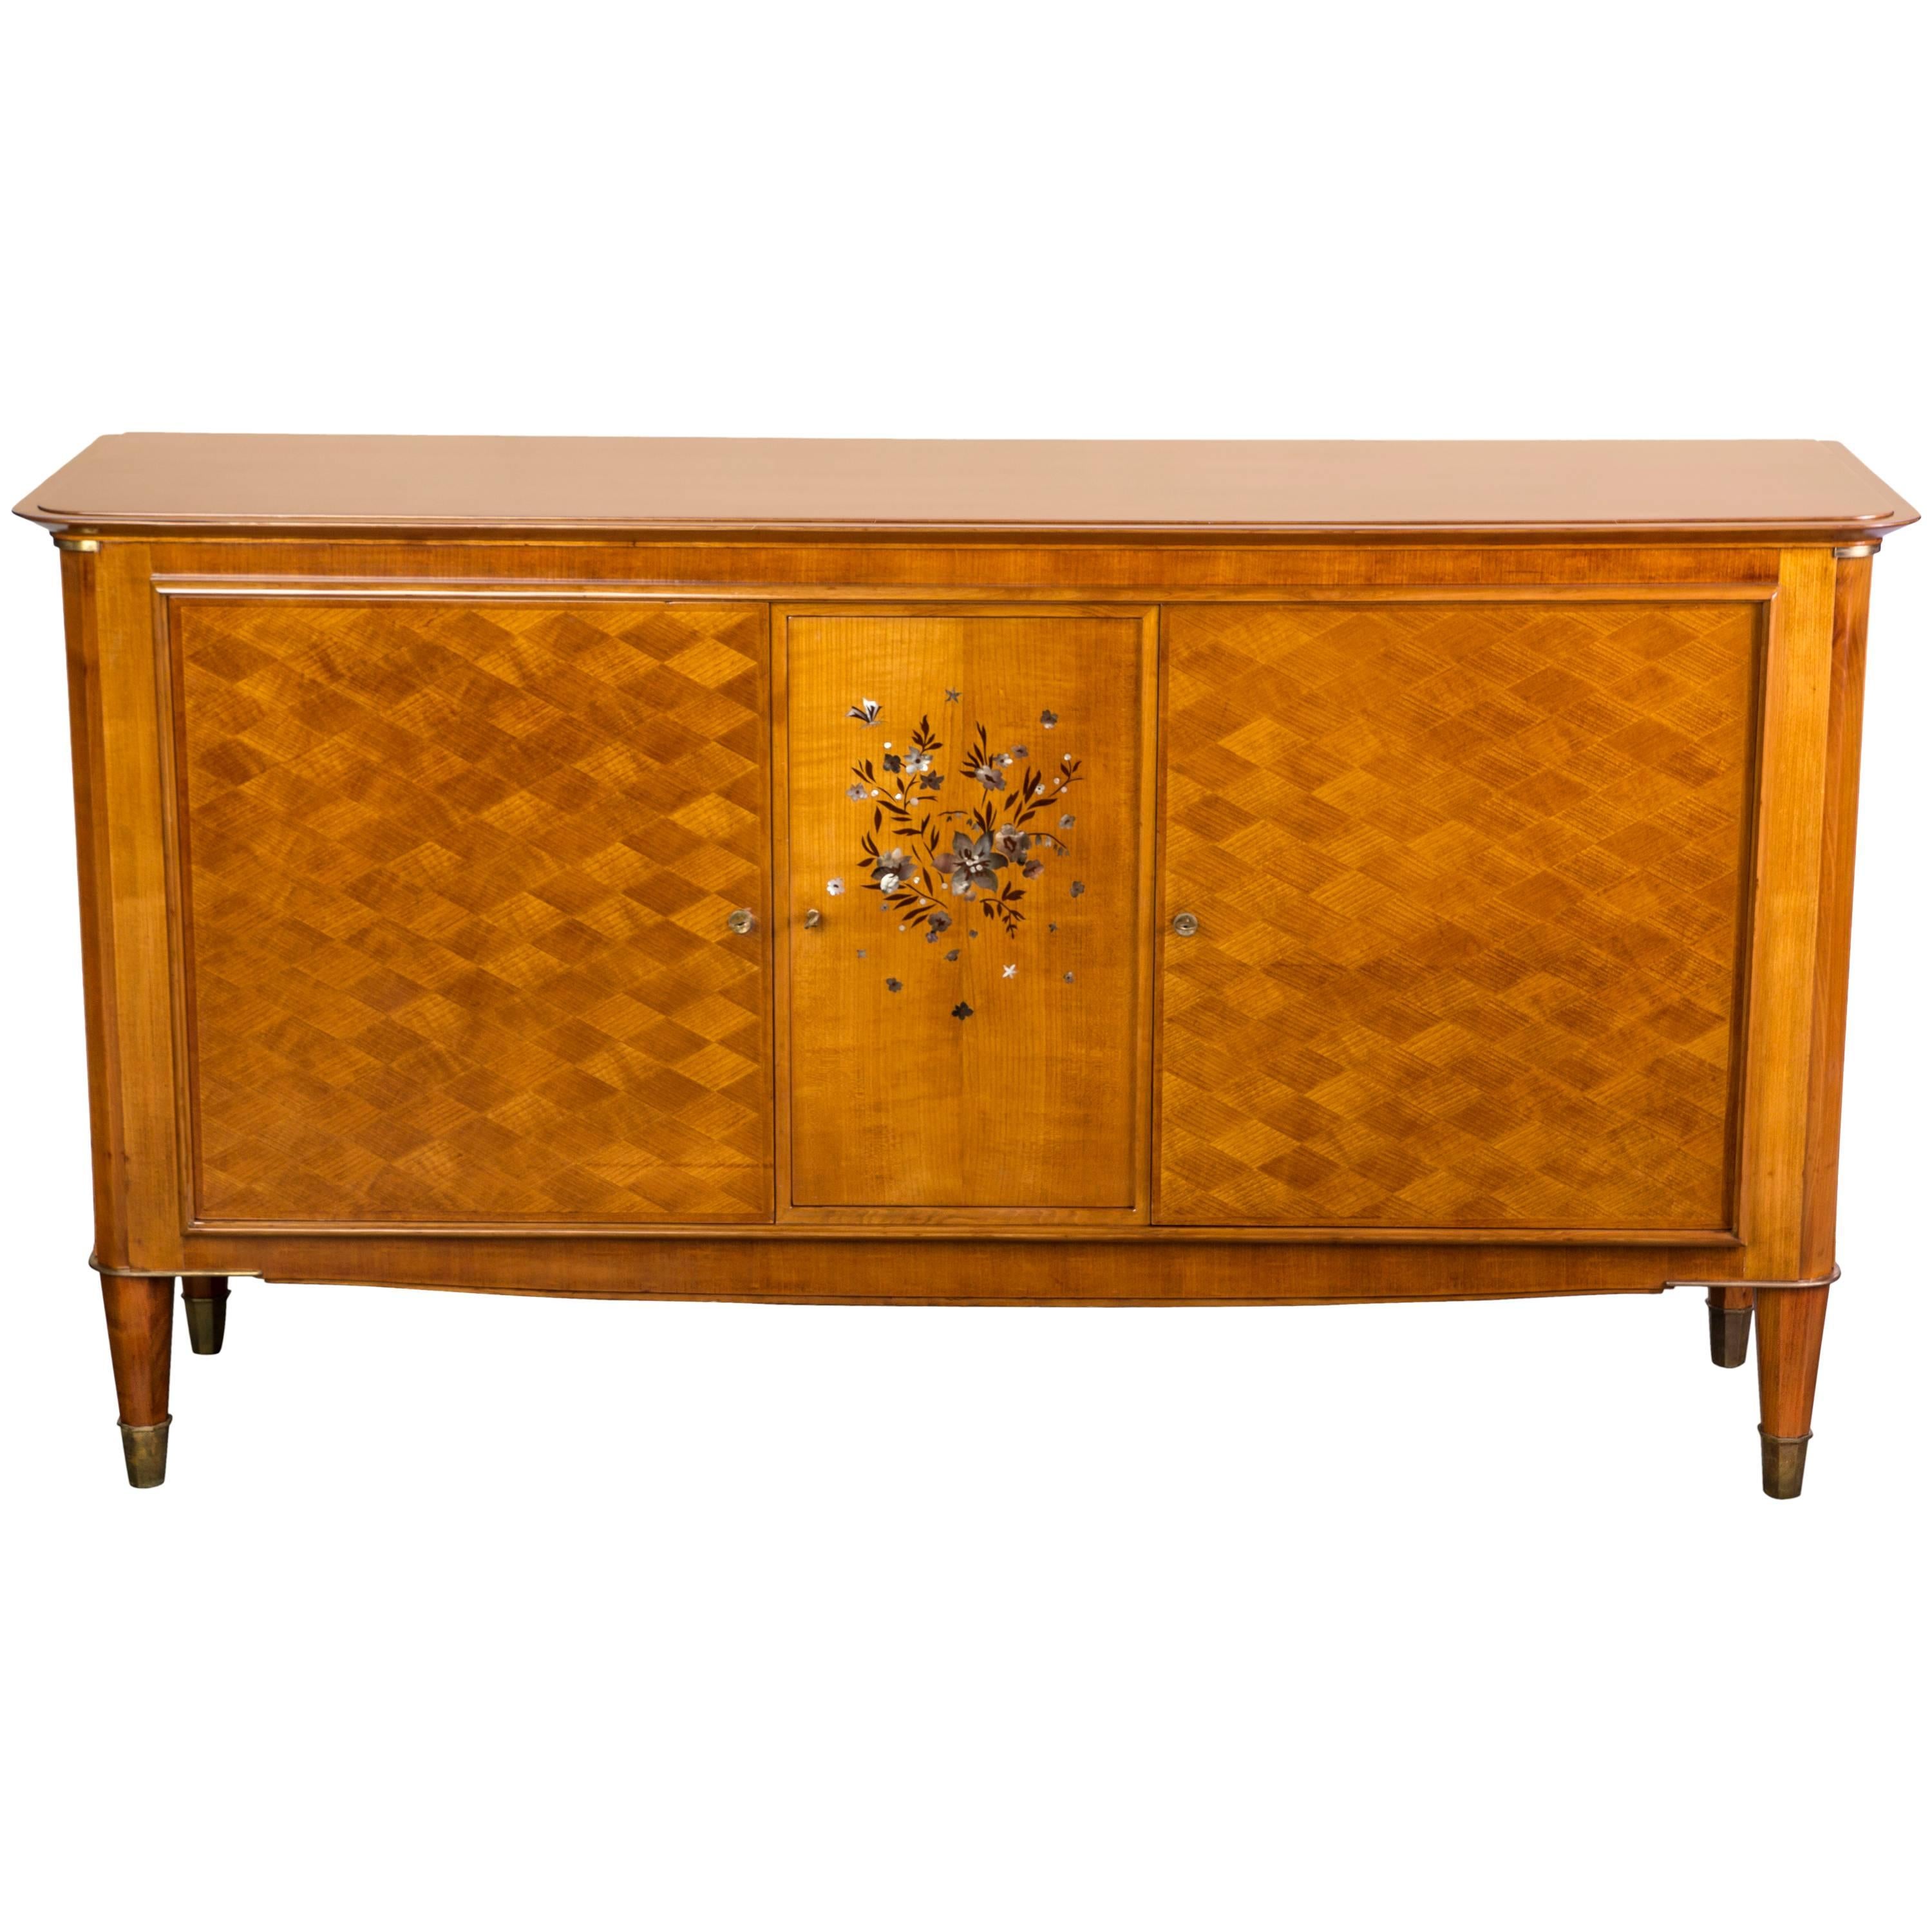 Stunning Museum Quality French Art Deco Buffet or Sideboard by Dominique